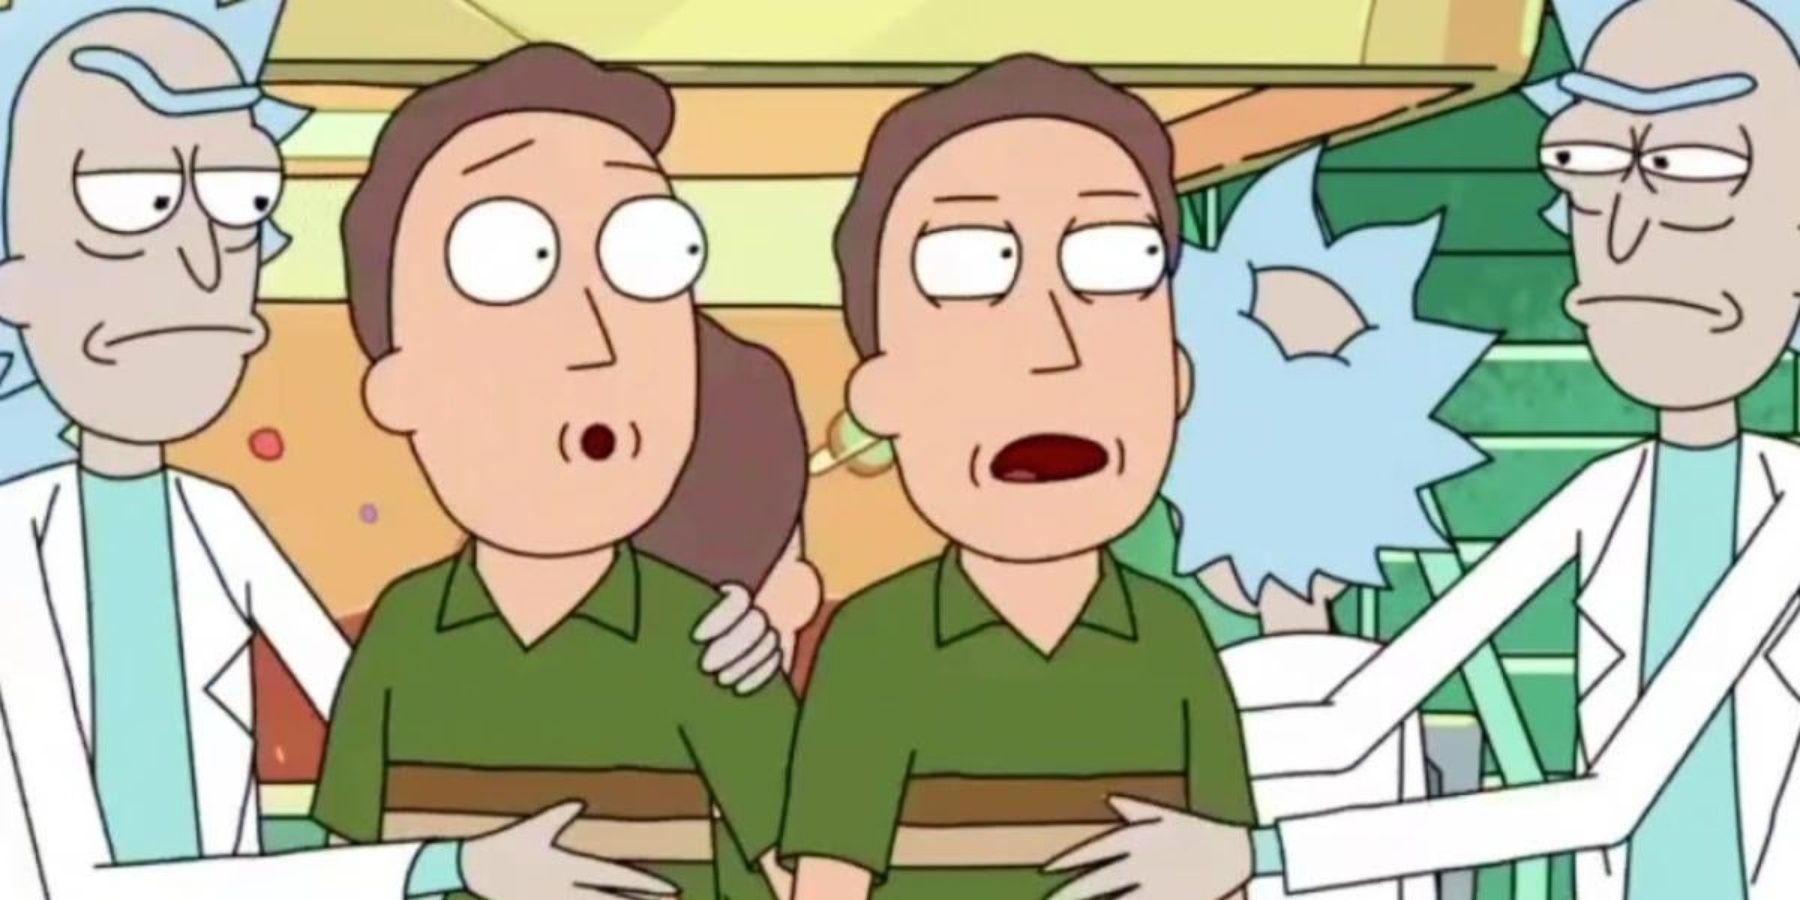 rick-and-morty-jerryboree-jerry-theory-confirmed-adult-swim (1)